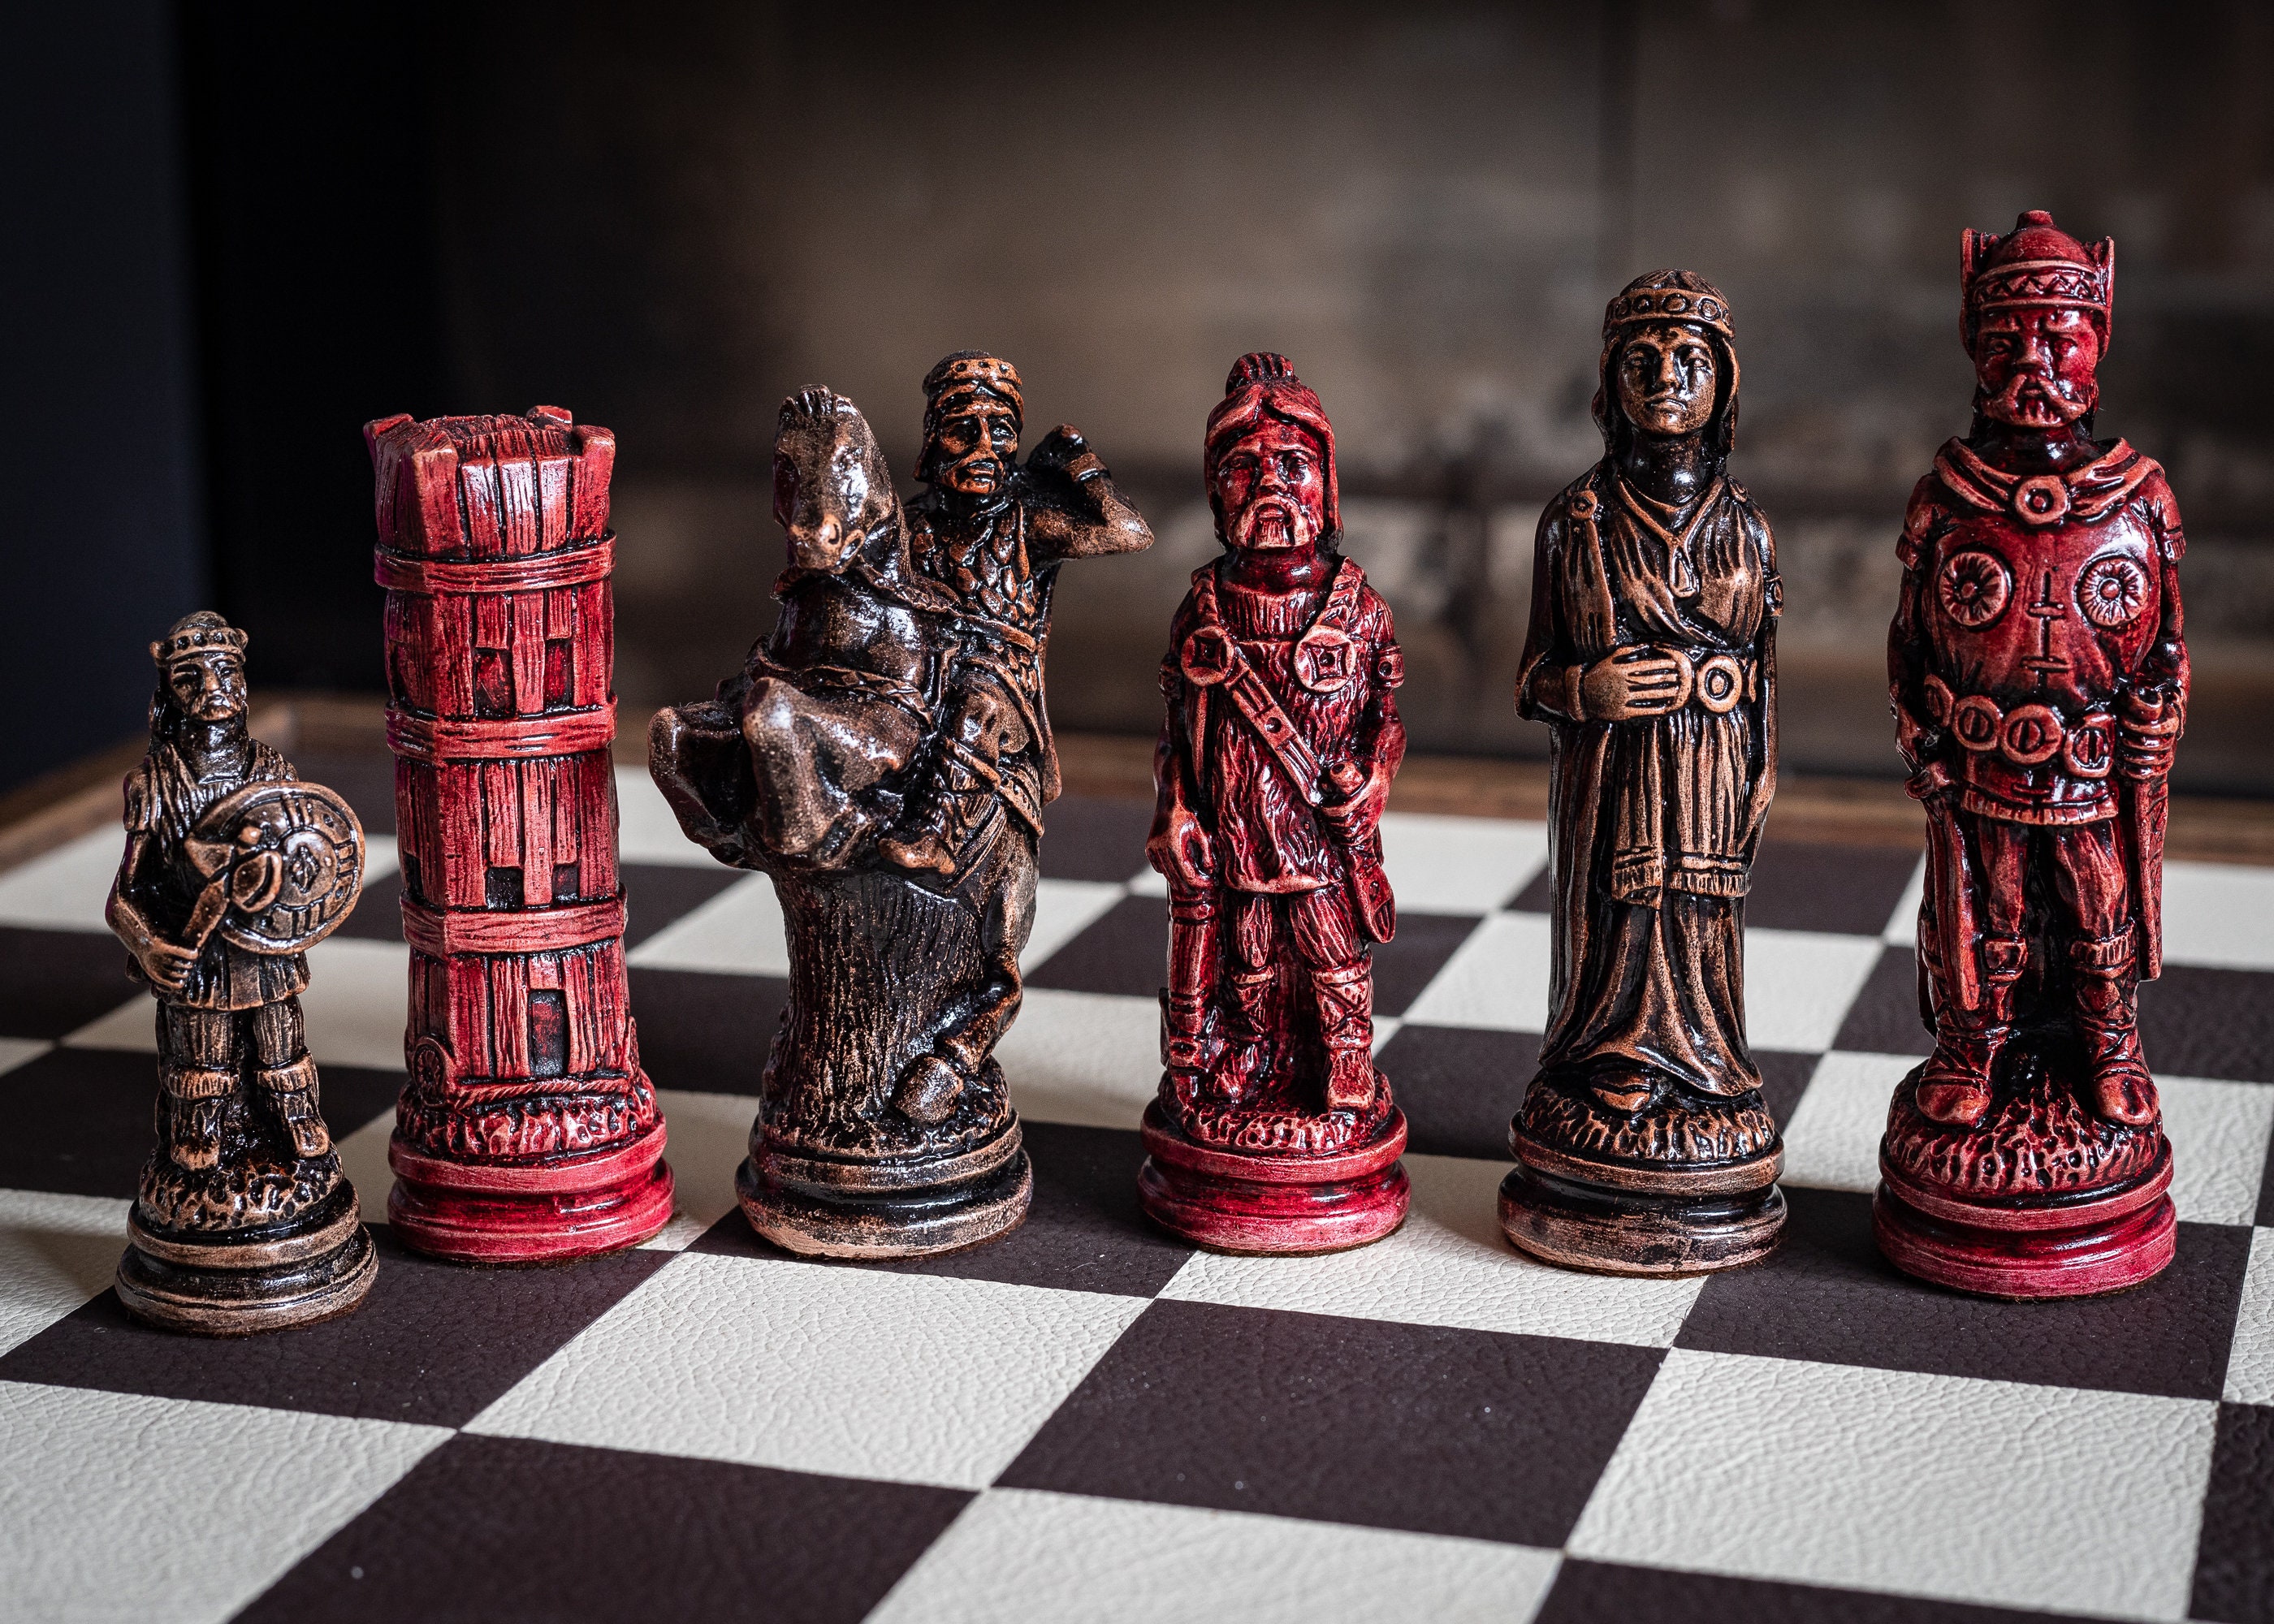 Made to Order Chess Set Viking Design in a Stone and Black. 